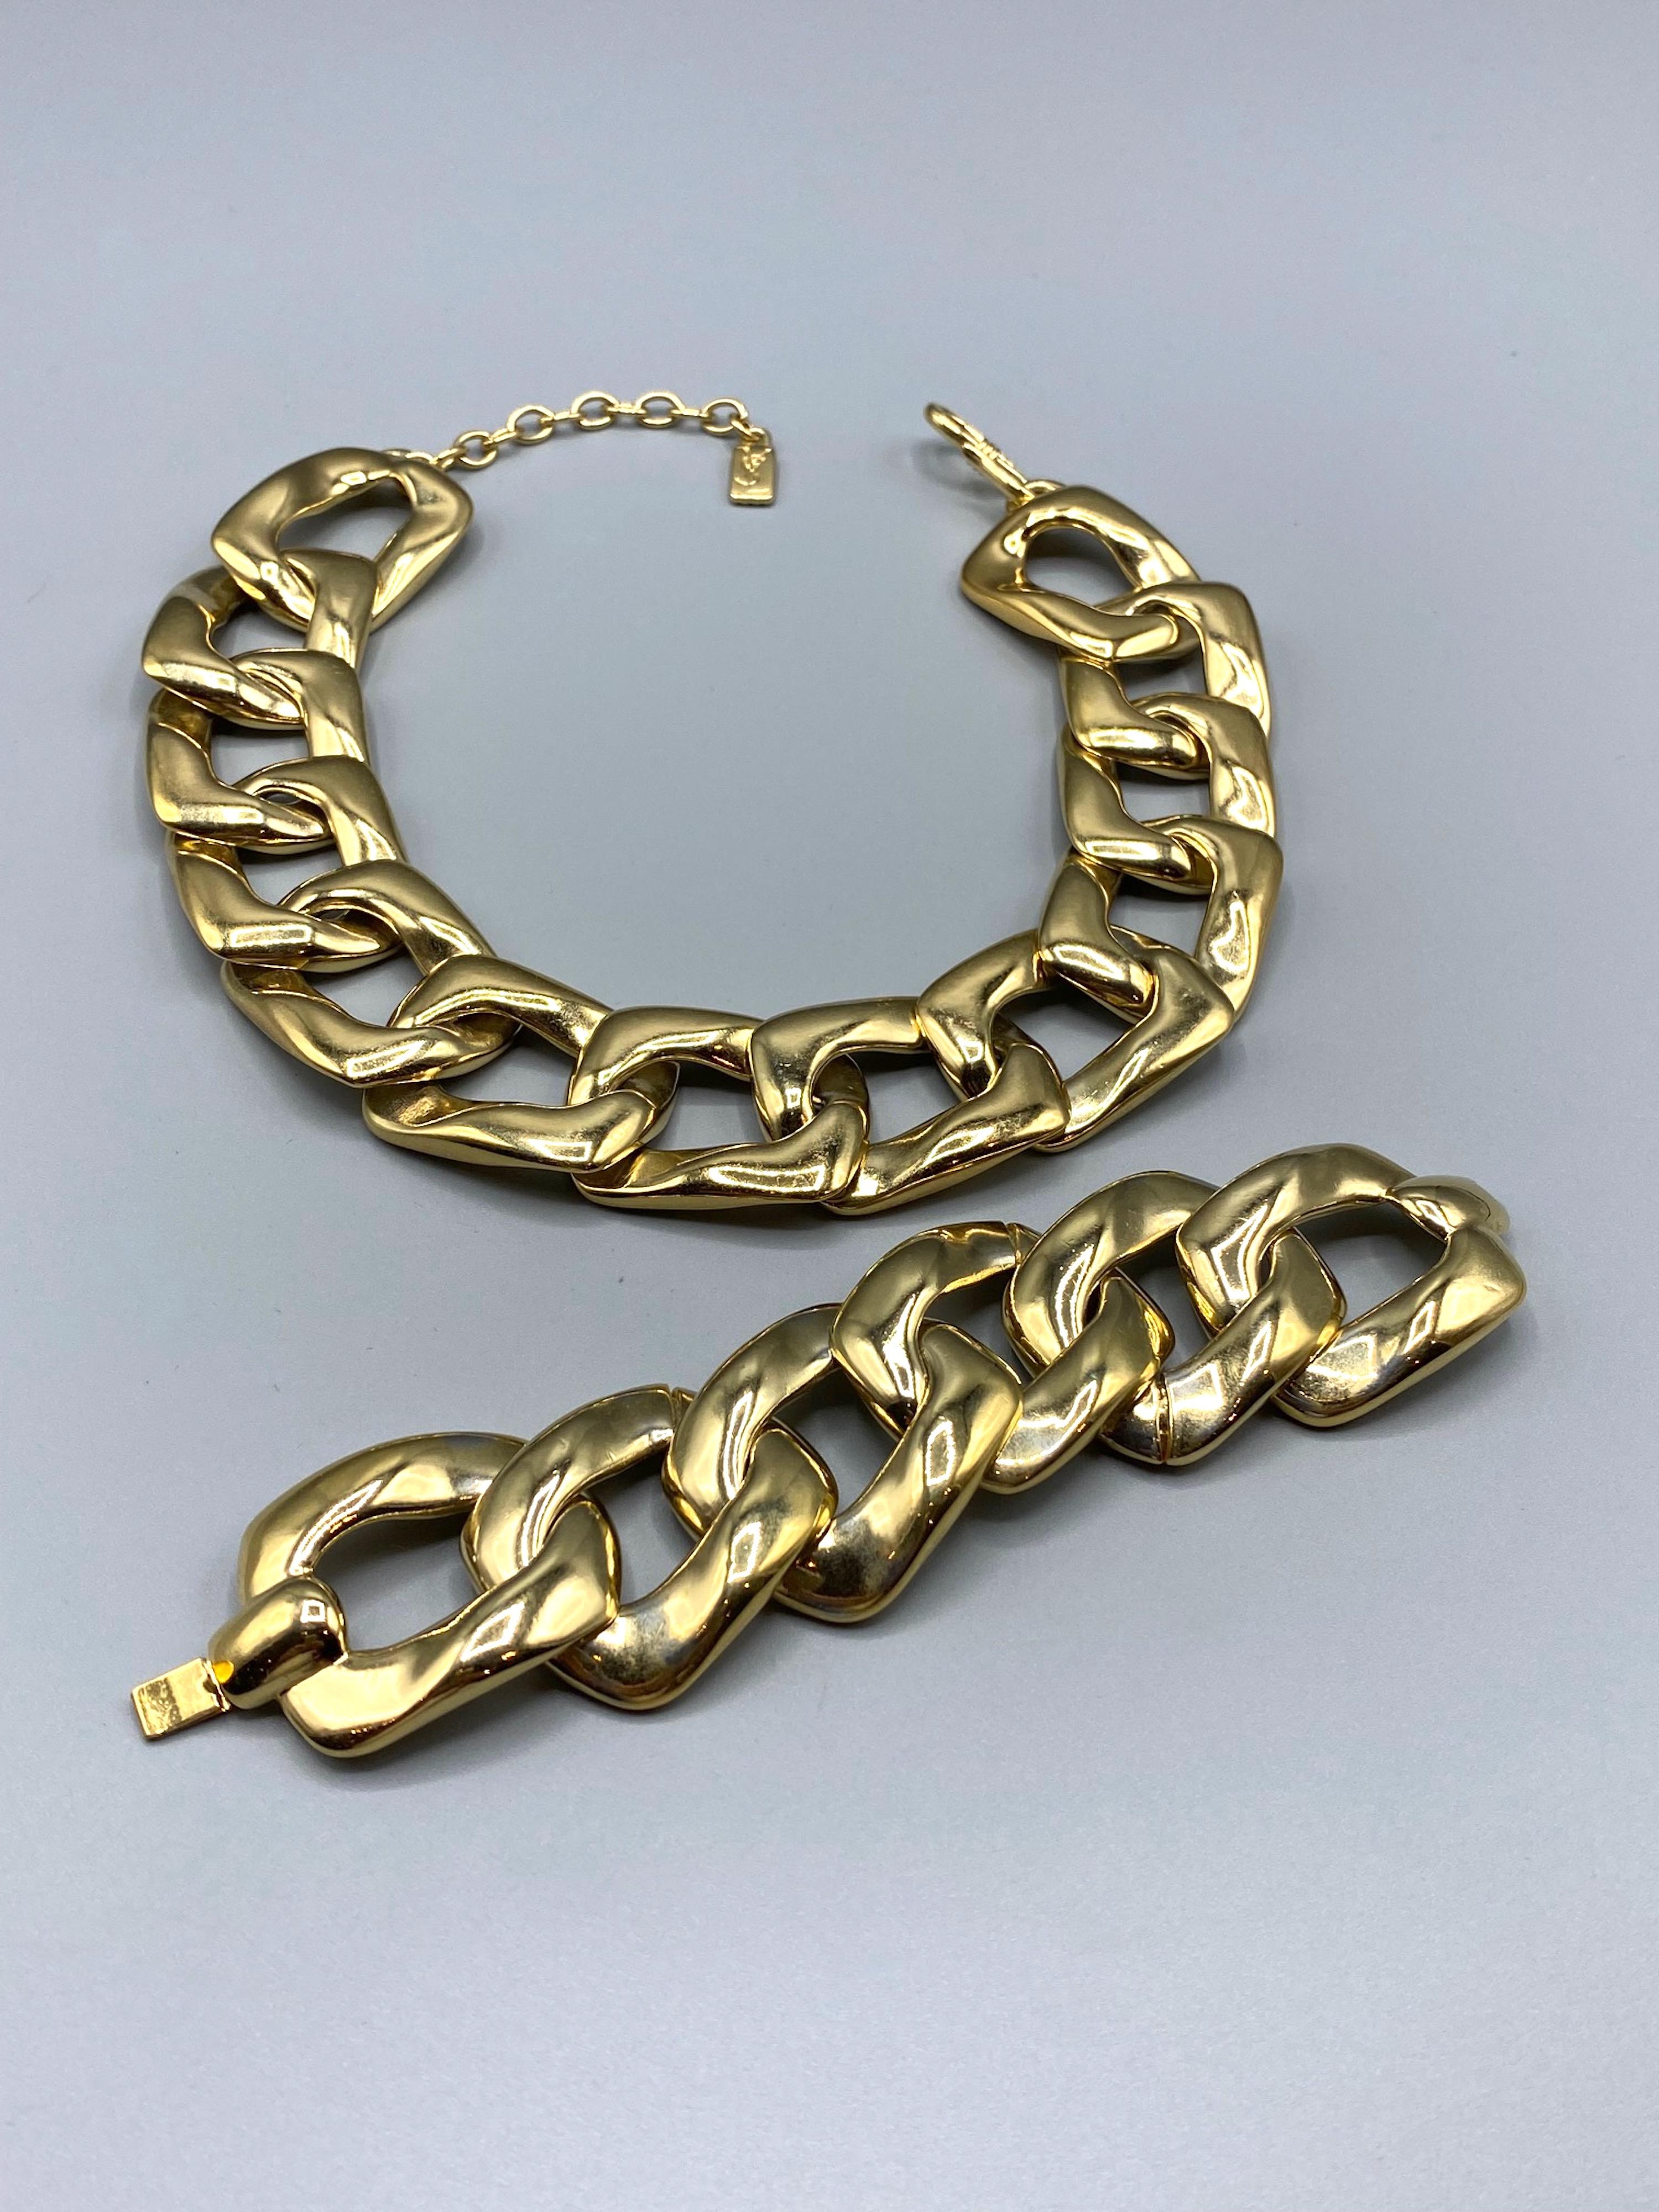 Yves Saint Laurent 1980's Large Gold Link Necklace & Bracelet Set In Good Condition For Sale In New York, NY